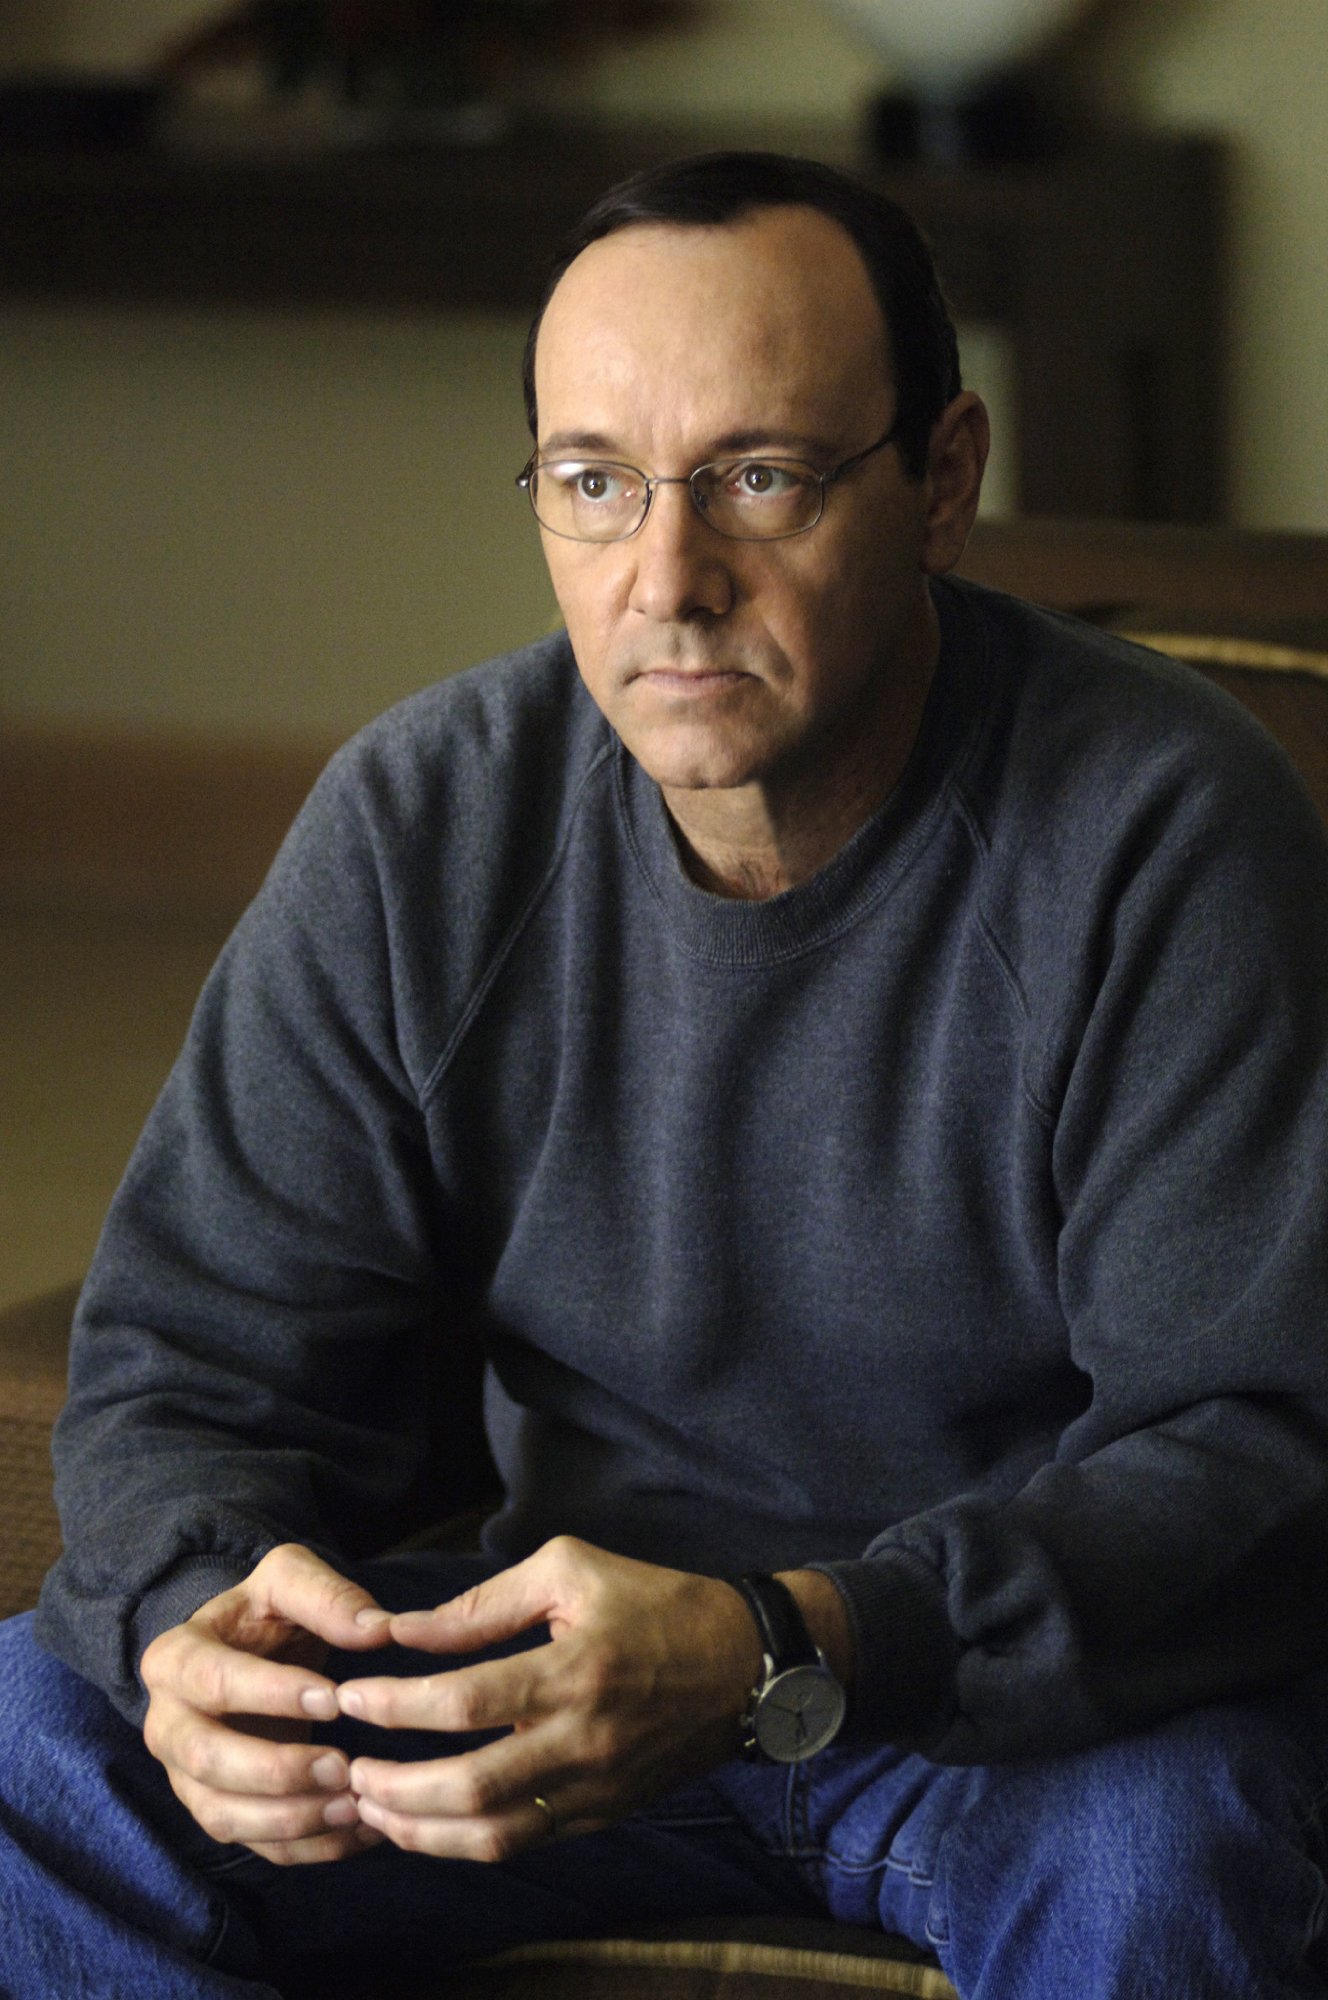 Download movies with Kevin Spacey, films, filmography and biography at | Movieboom.biz